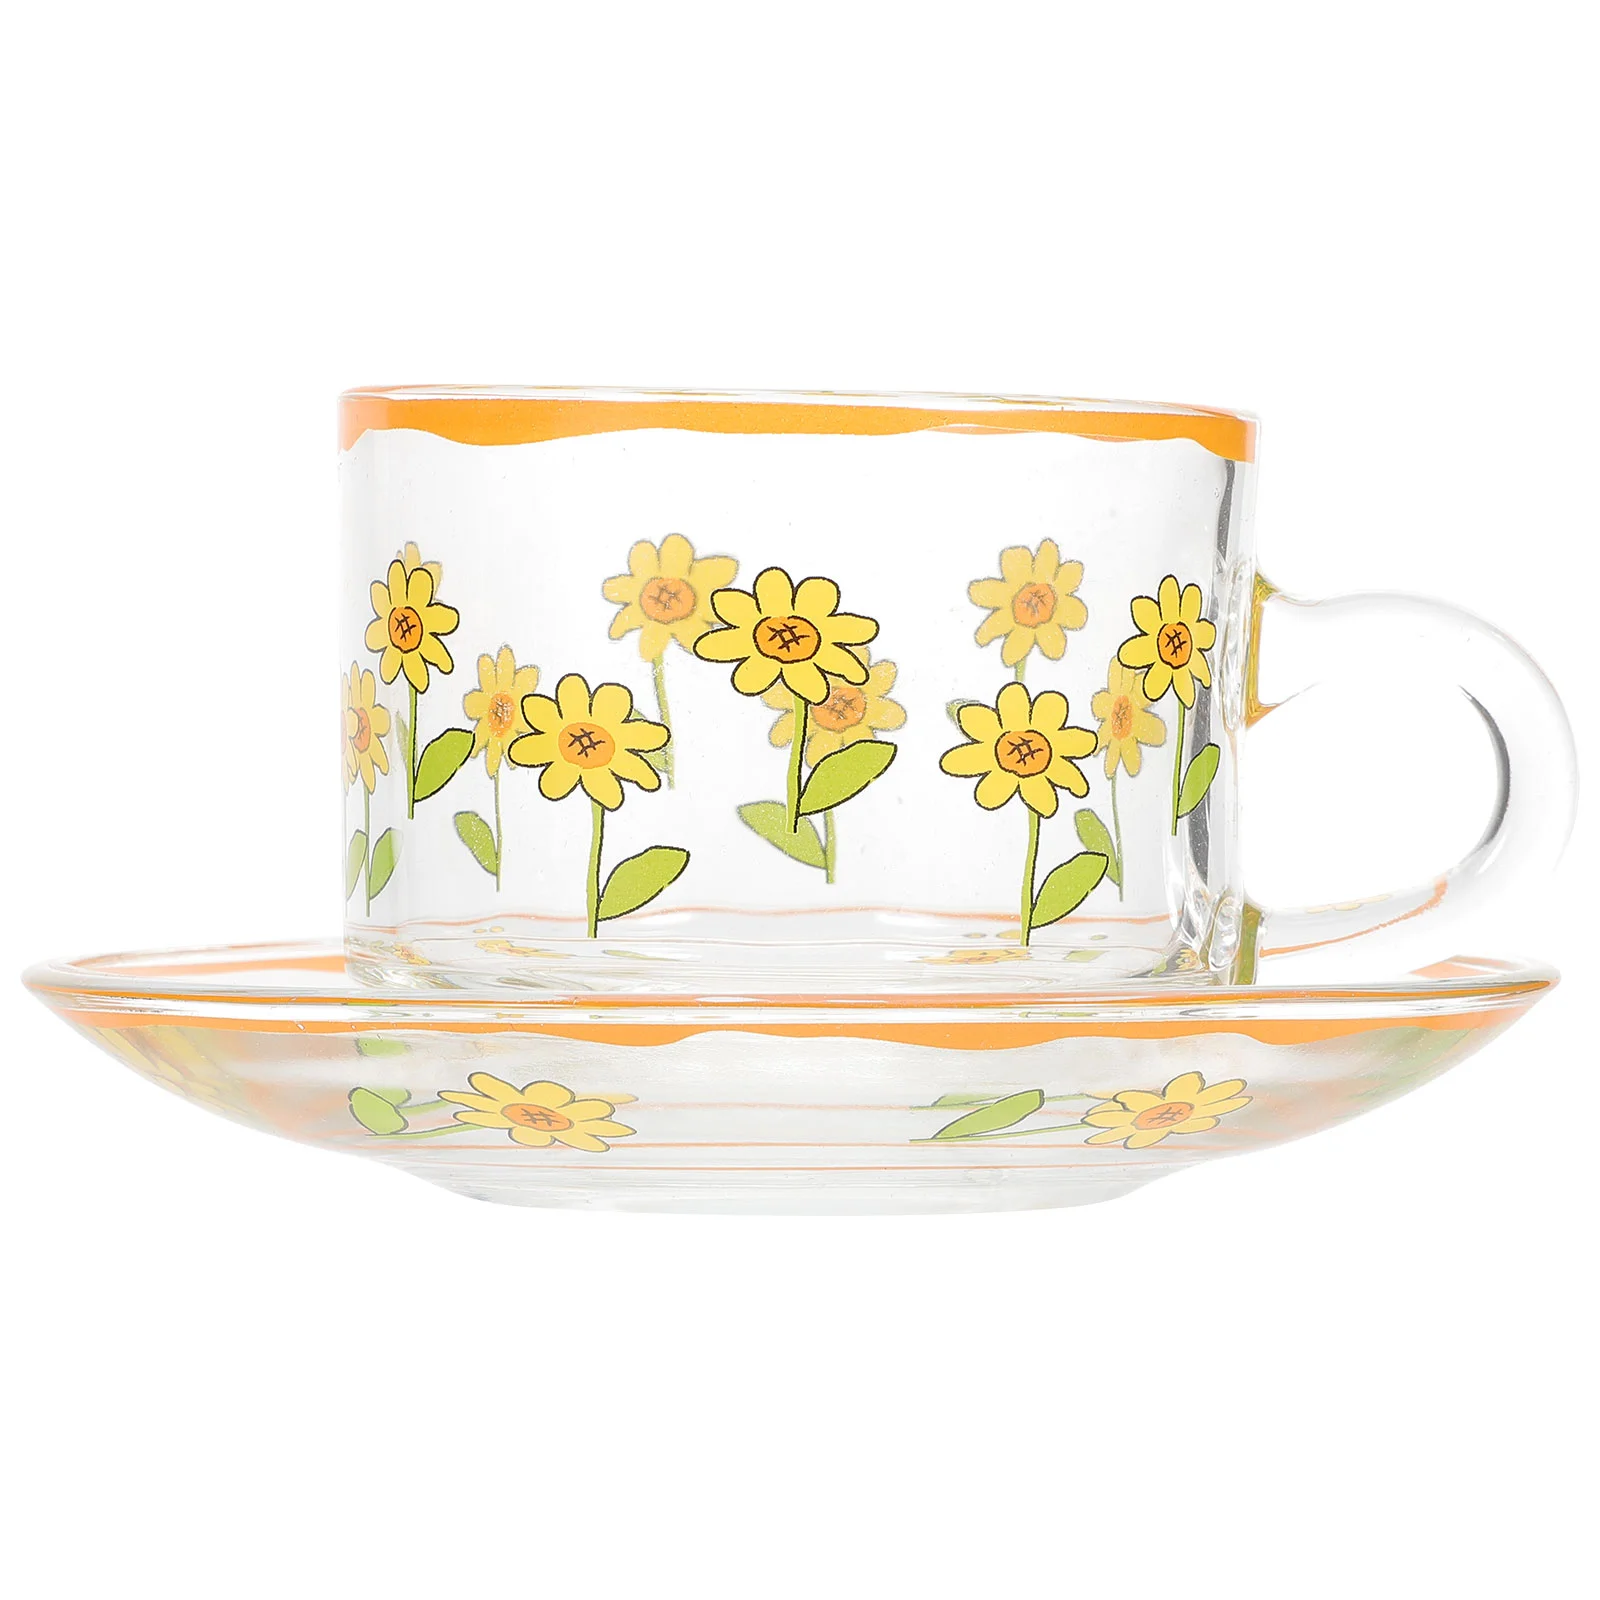 

Cup Tea Mug Coffee Clear Cups Latte Saucer Flowers Sunflower Set Flower Water Drink Mugs China British Marble Porcelain Novelty